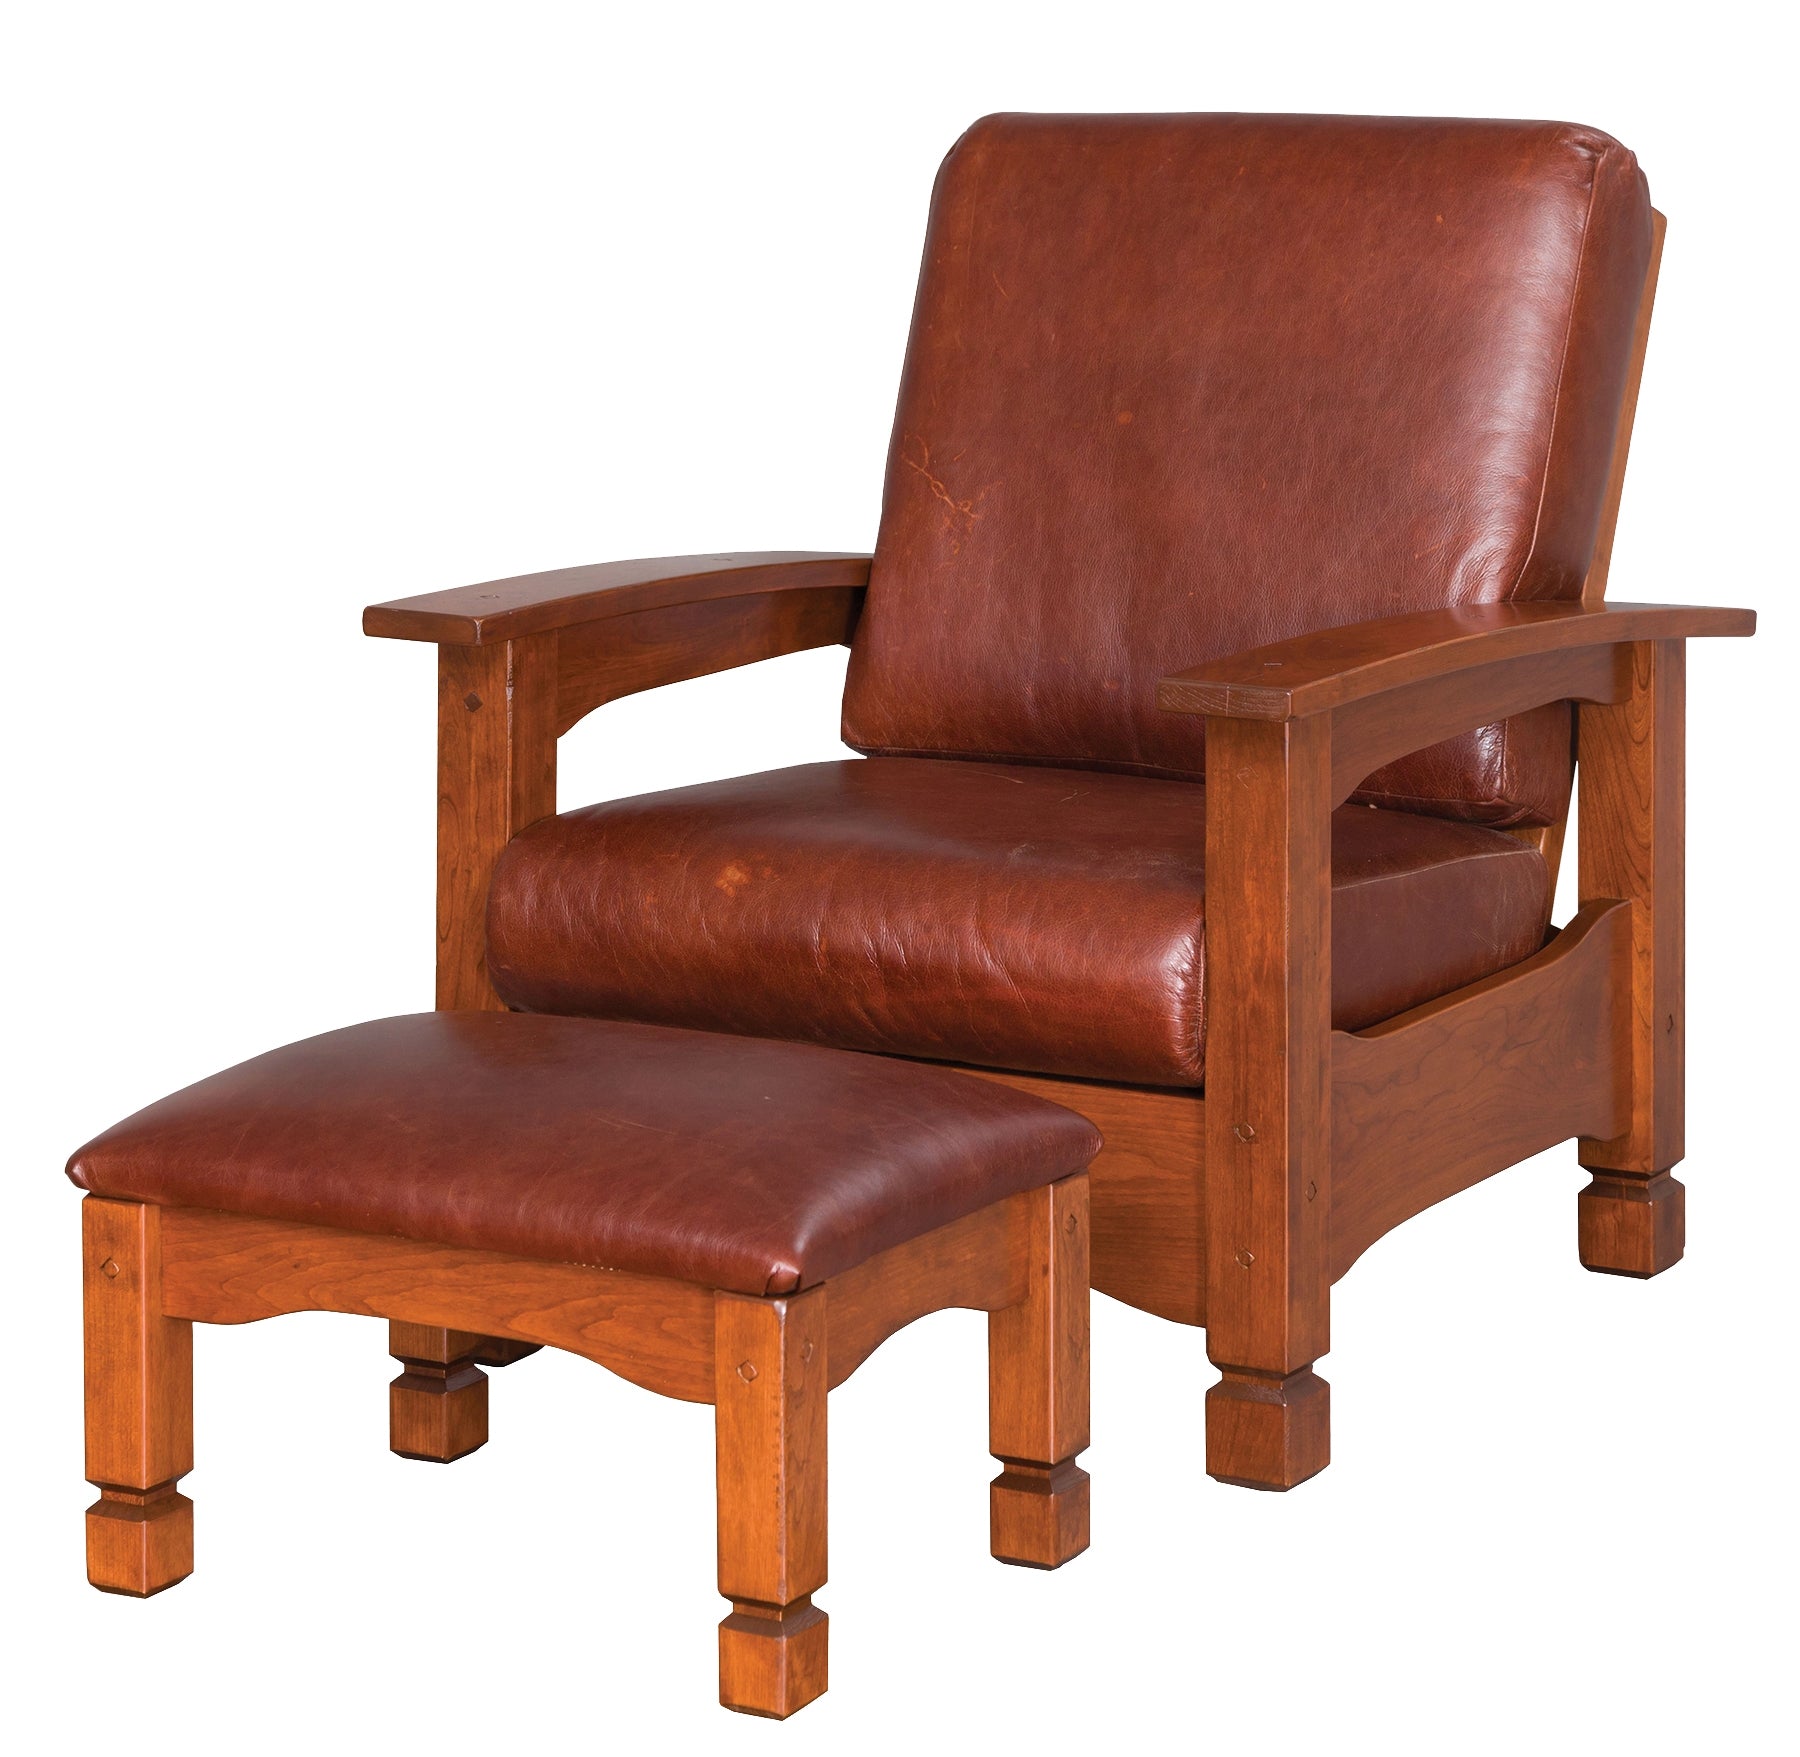 Rustic Country Morris Chair - snyders.furniture